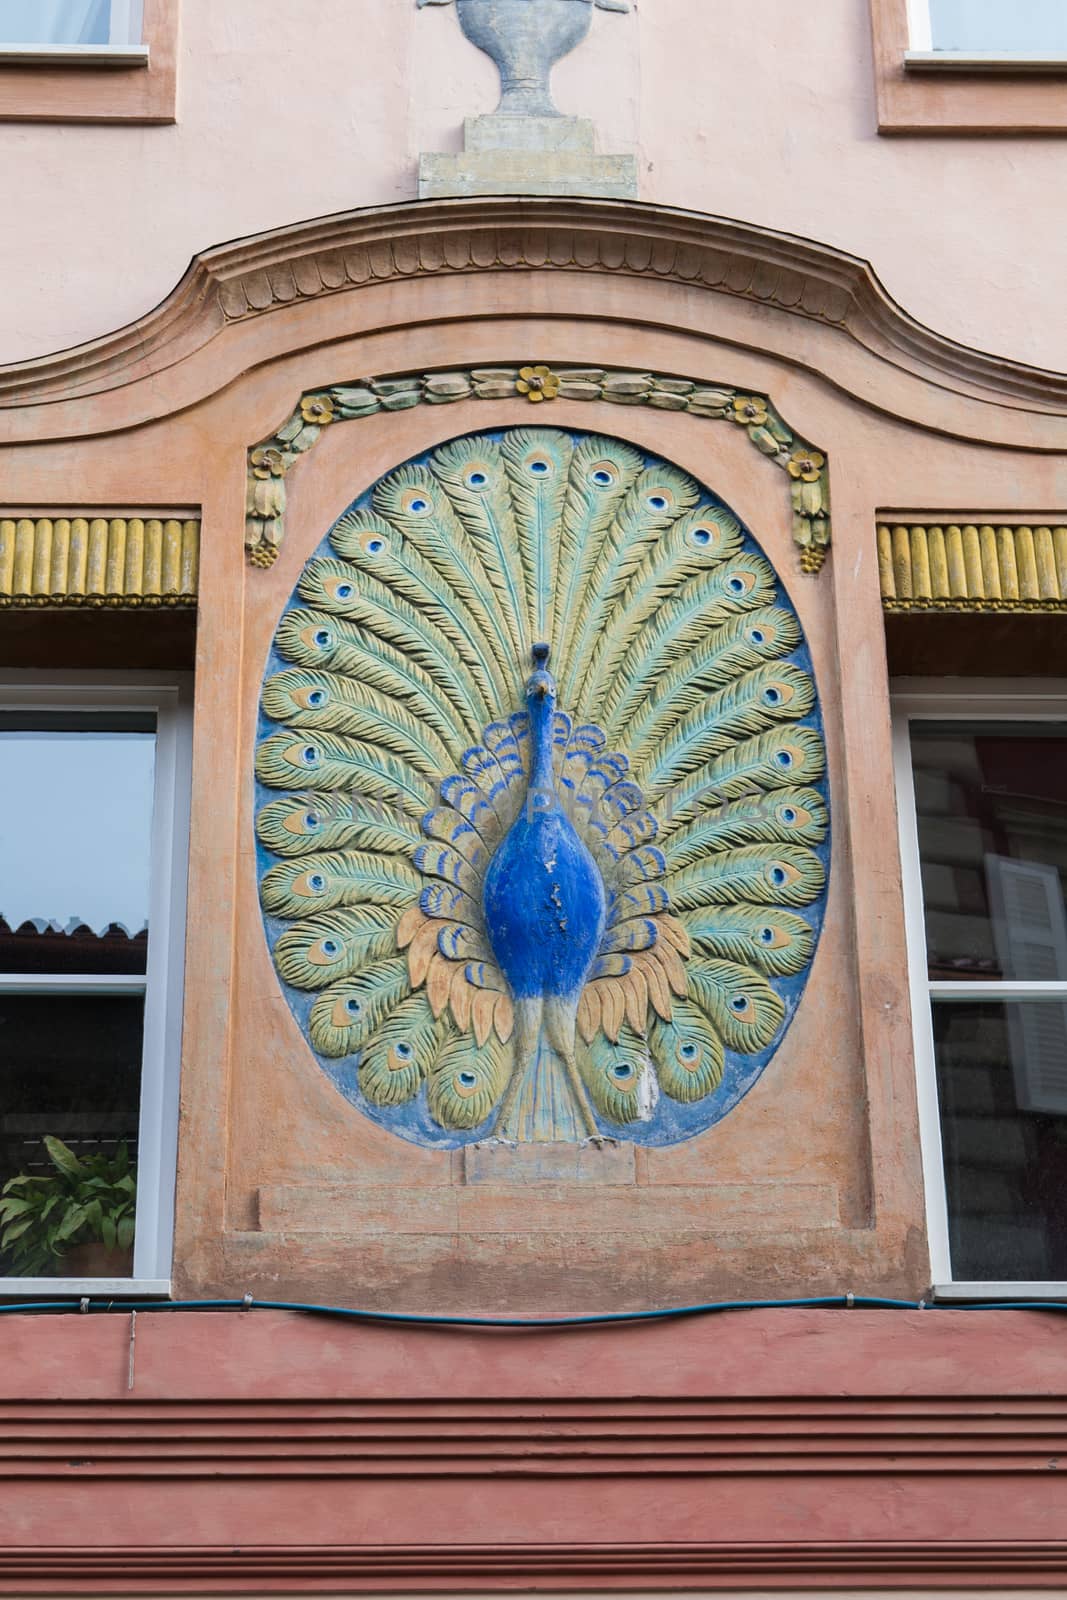 Colorful peacock sculpture adorns a historic building. by Isaac74